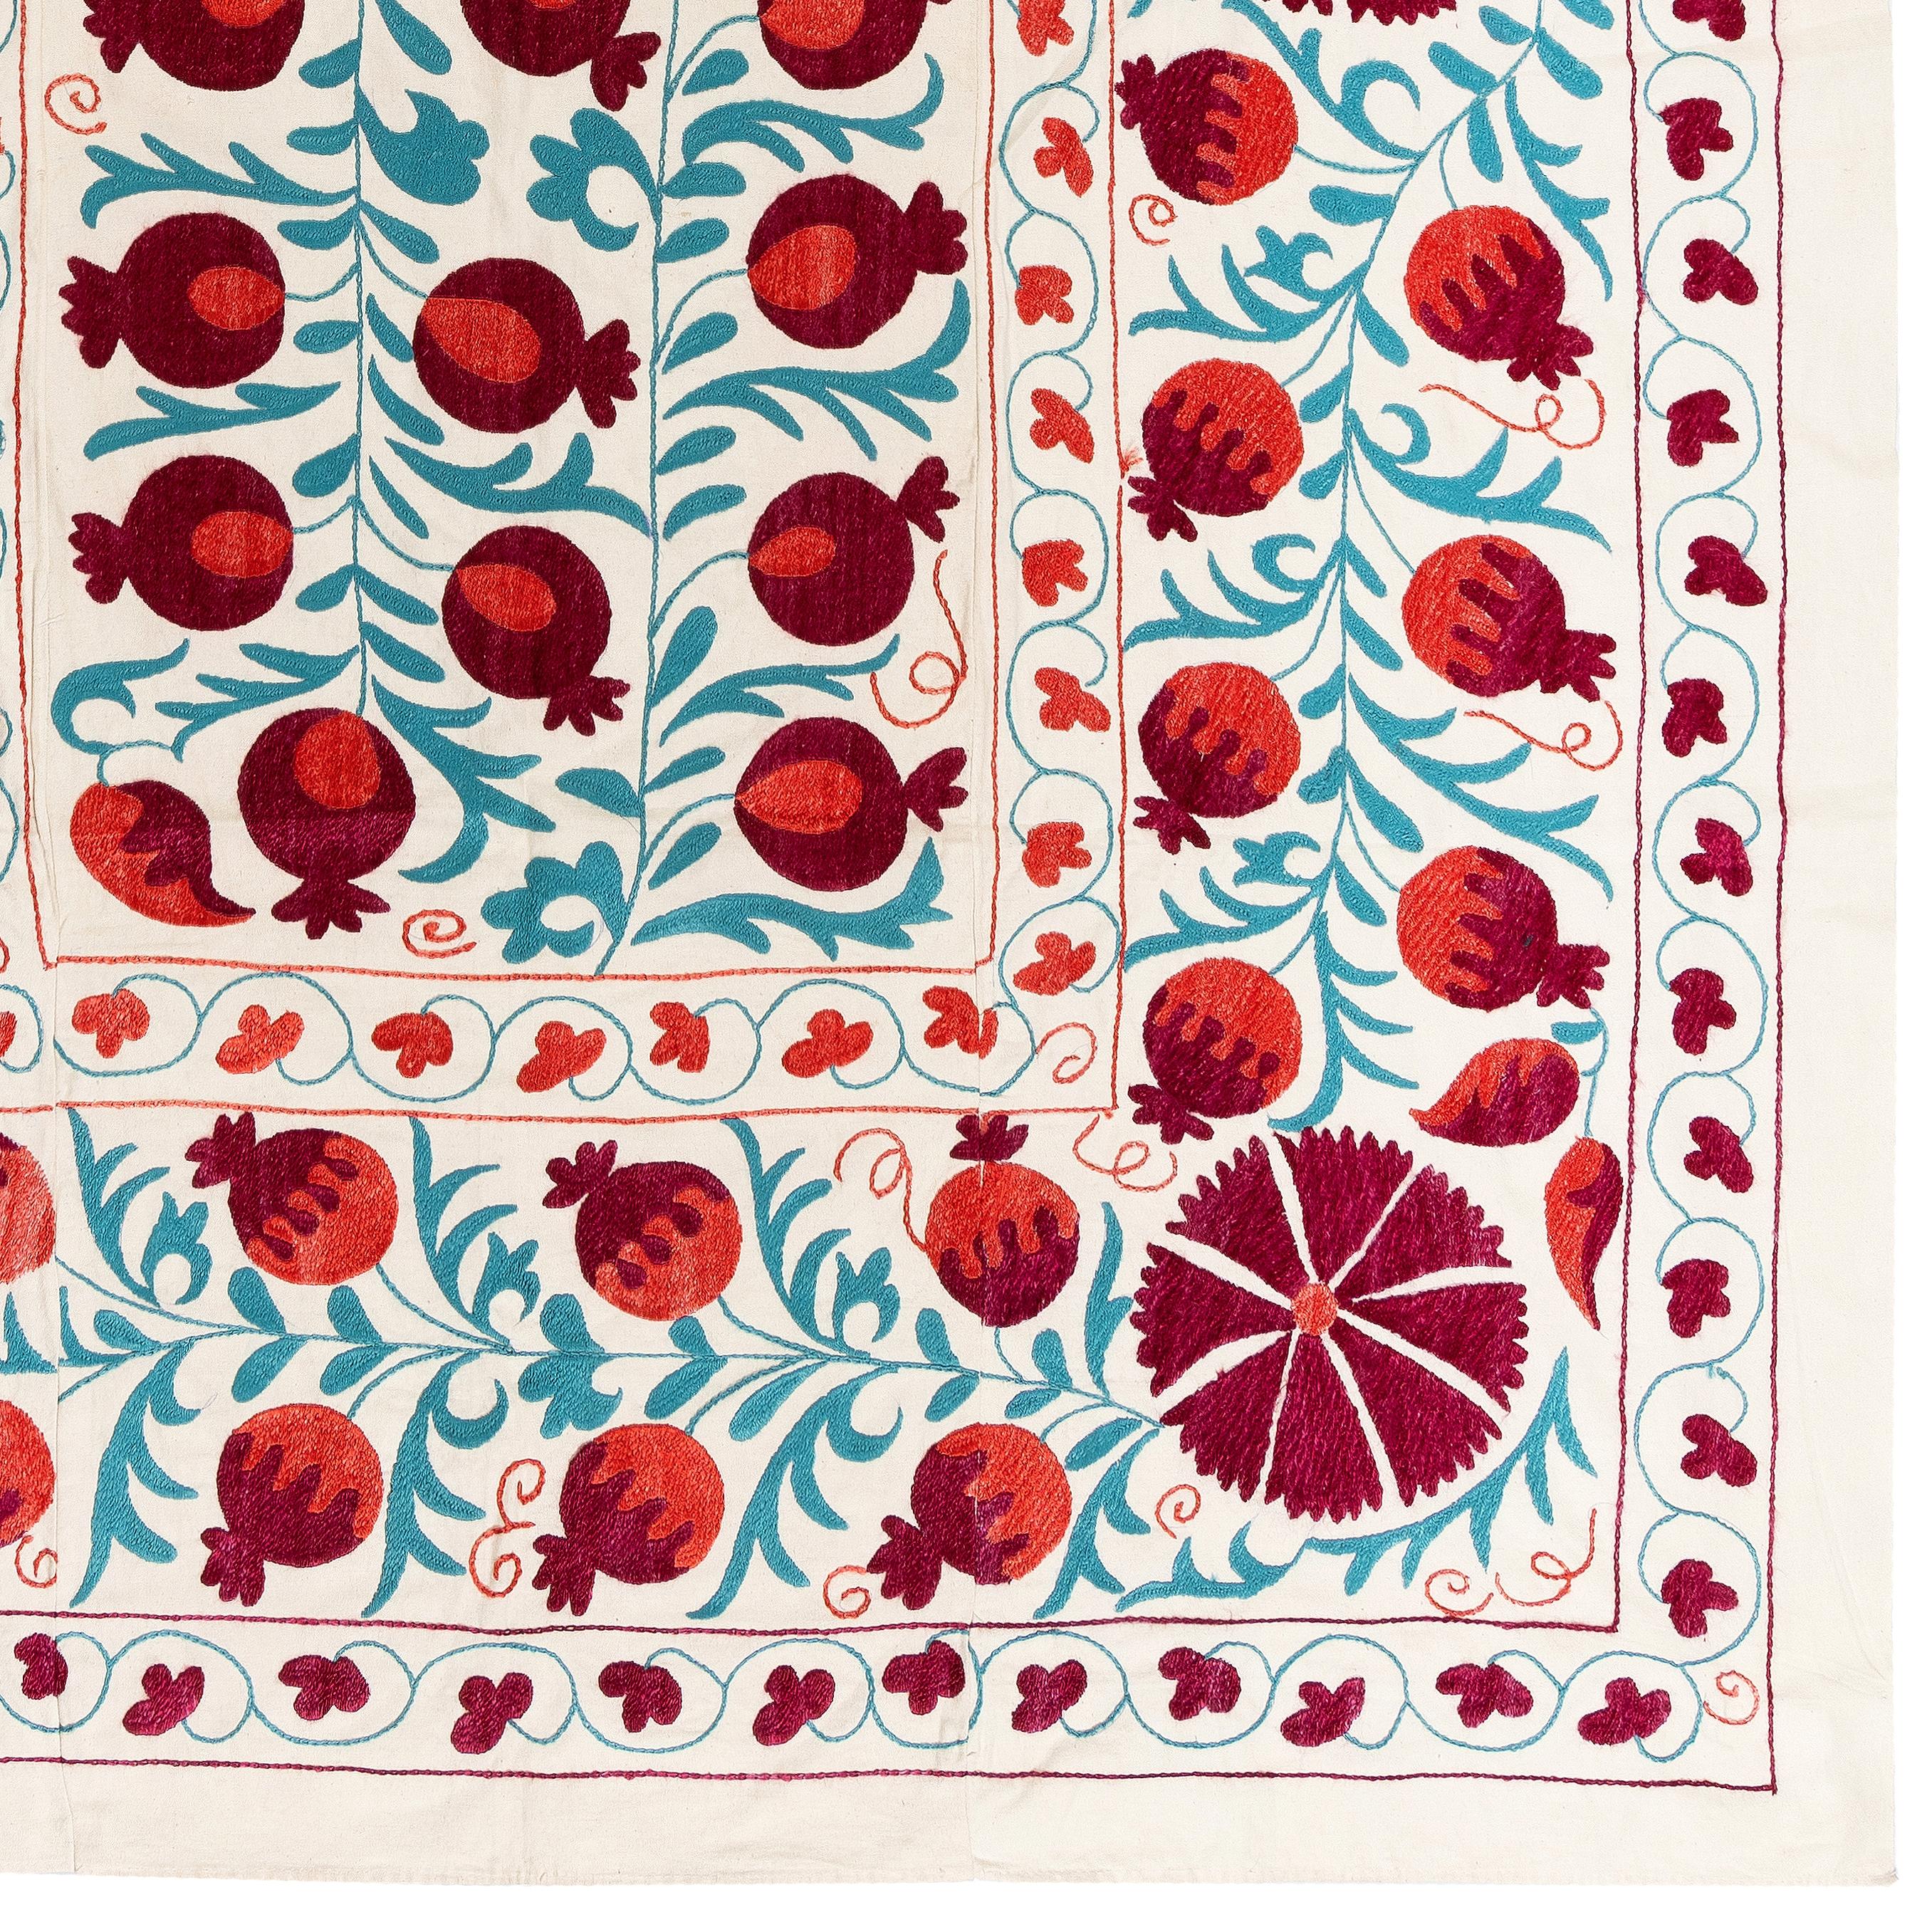 Uzbek 4.8x6.8 Ft Silk Embroidery Wall Hanging in Red, Blue & Ivory. Suzani Wall Decor For Sale